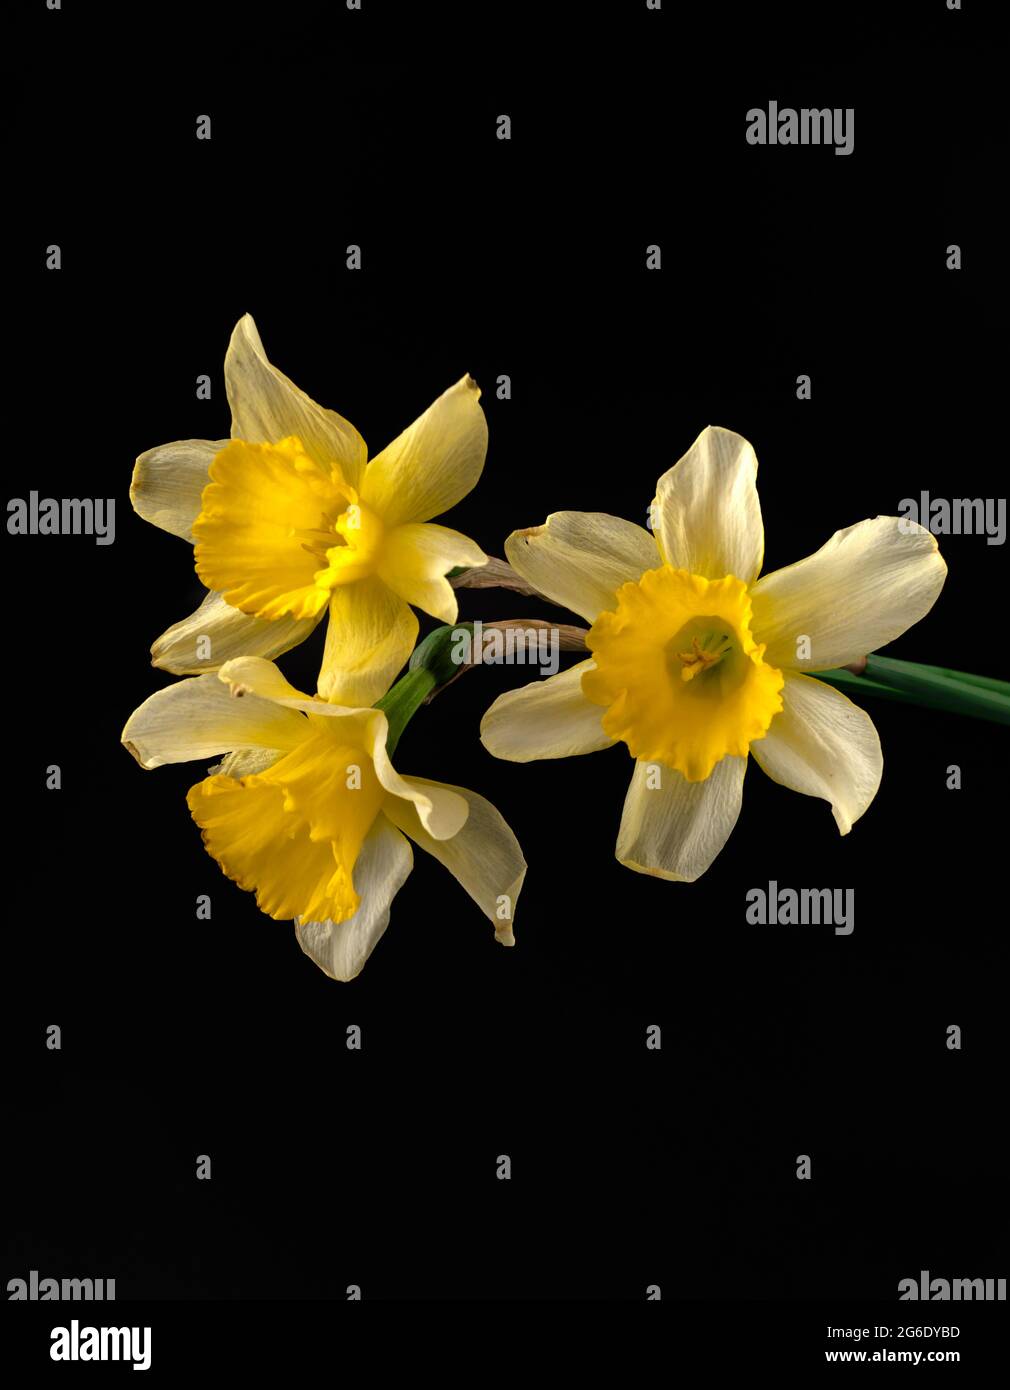 Daffodils, three Narcissus flowers on a black background isolated Stock Photo